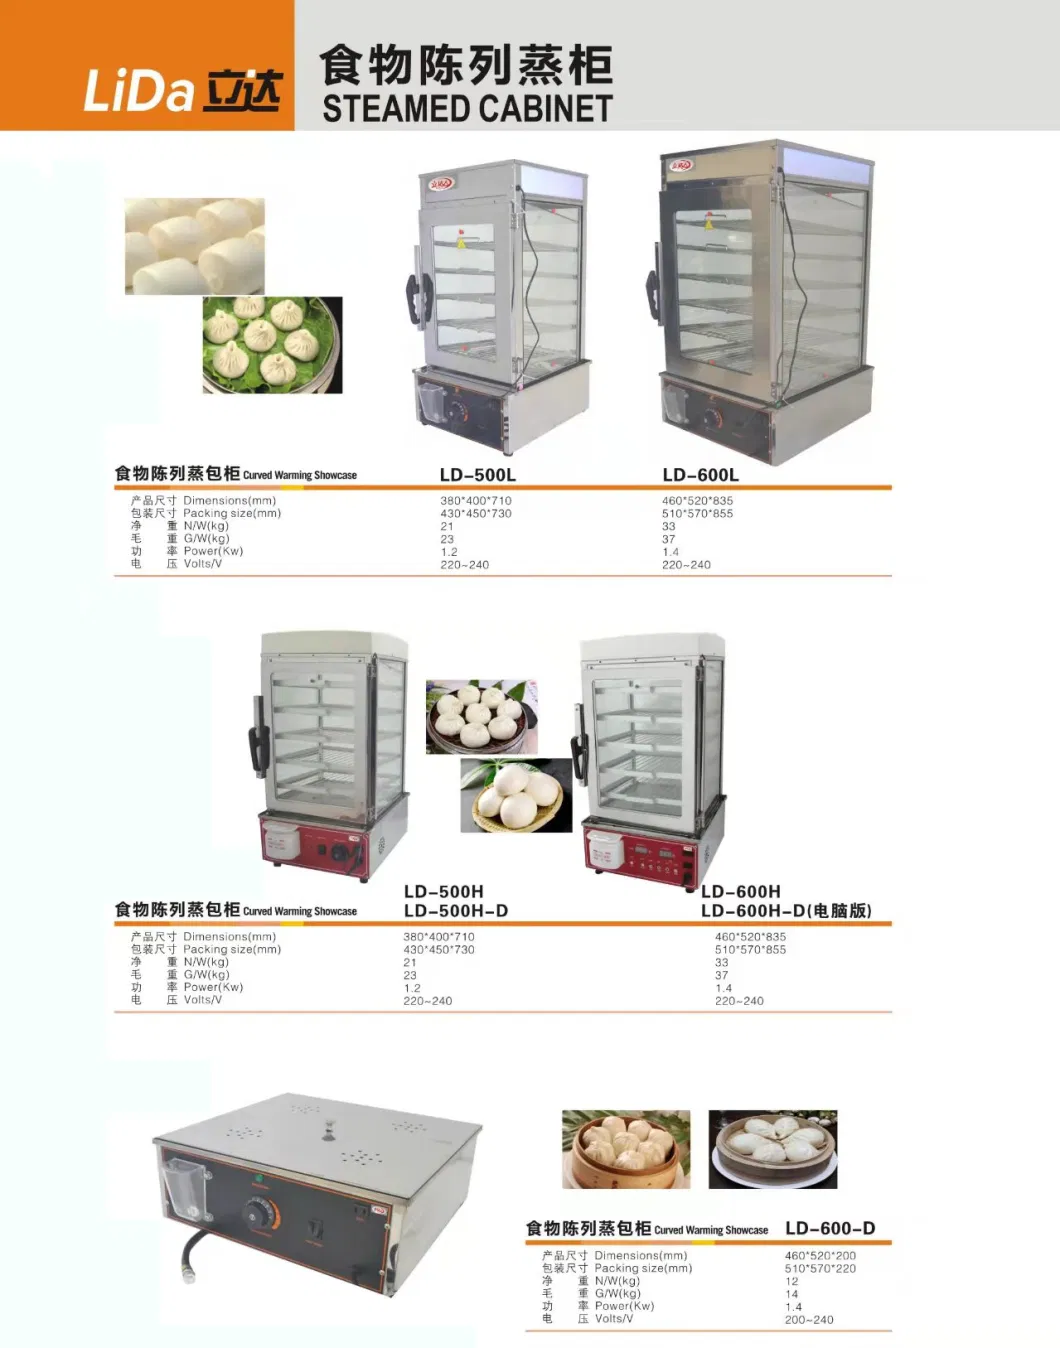 Food Steamer Appliance Commercial Stainless Steel Convenient Store Restaurant Electric Bun Steamer 5 Layer Food Steam Steaming Machine Cabinet Showcase Display